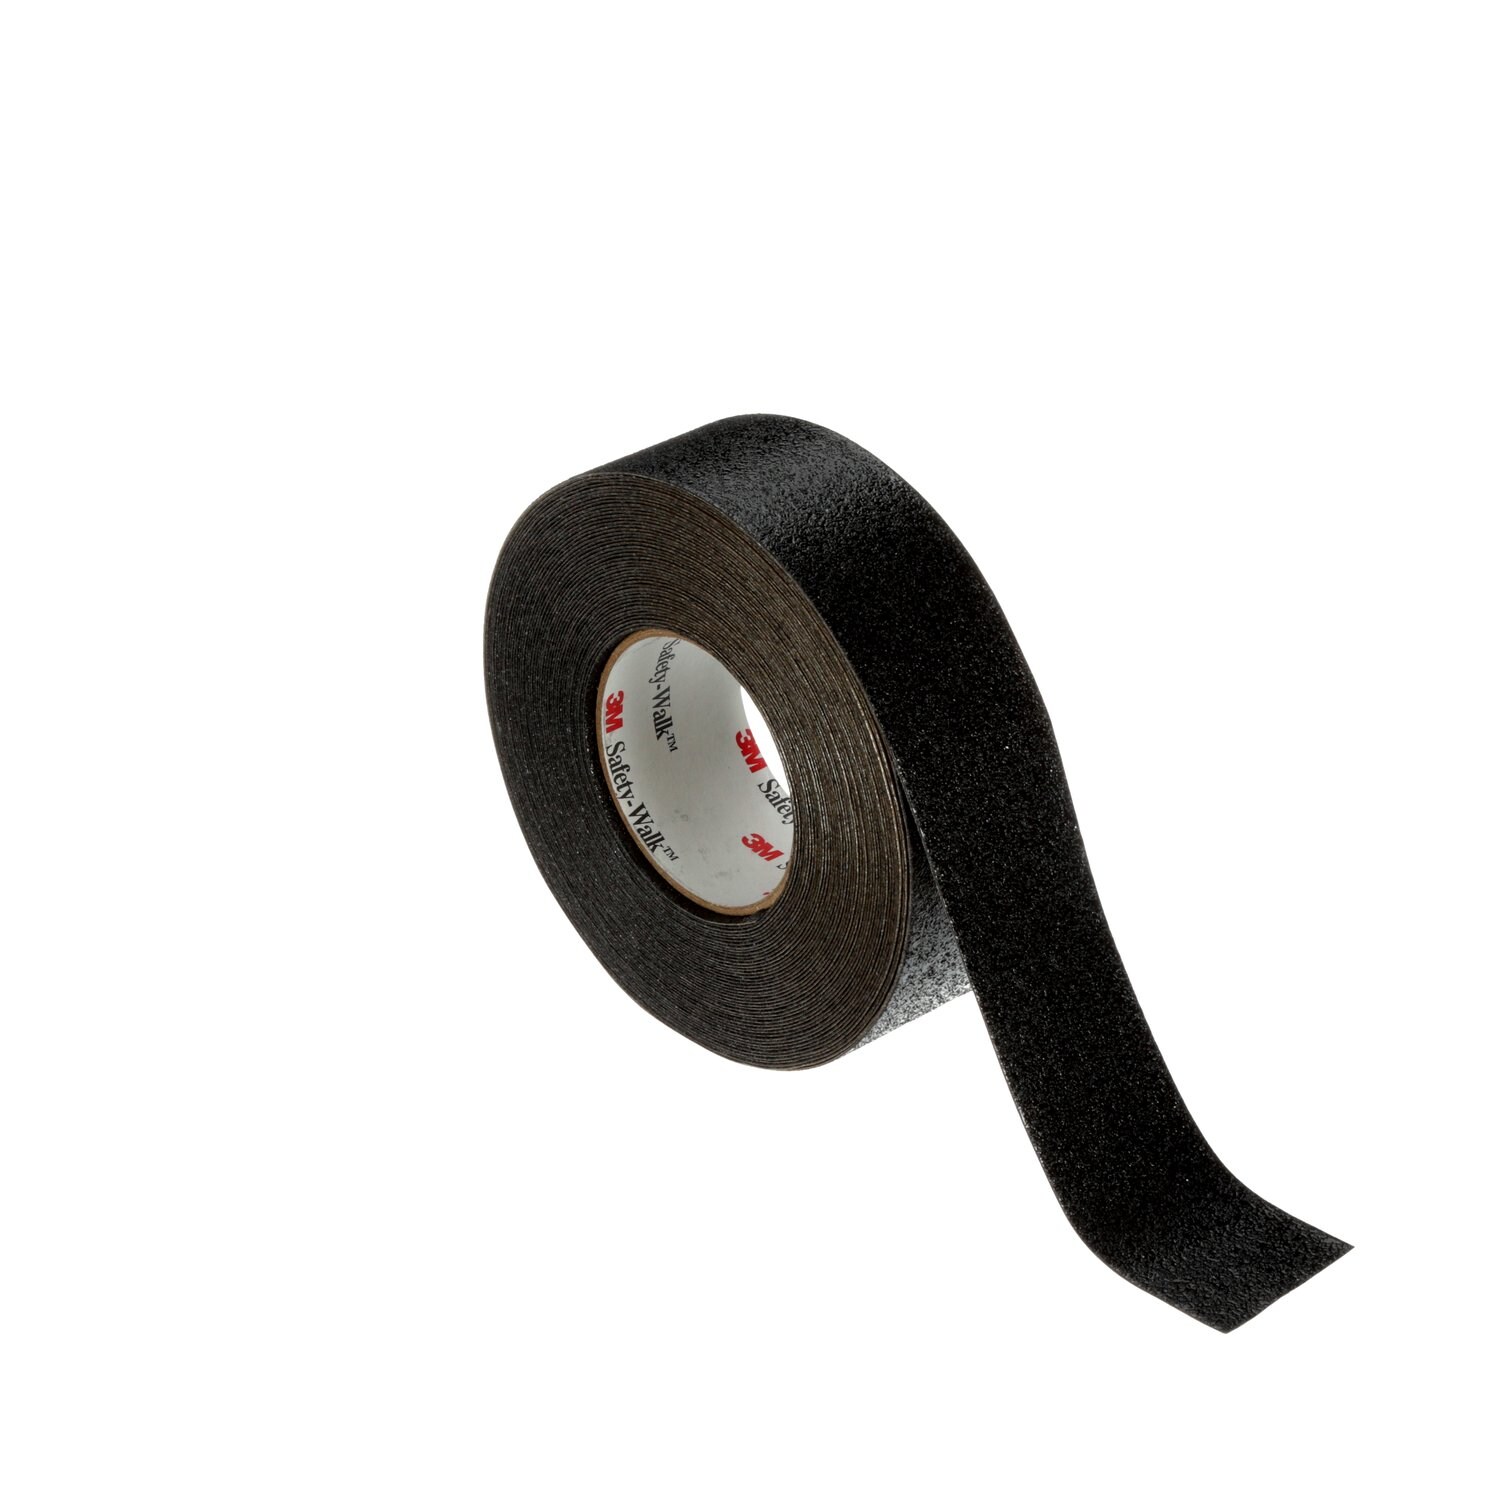 https://www.e-aircraftsupply.com/ItemImages/39/1395189E_safety-walk-slip-resistant-conformable-tapes-treads-510.jpg